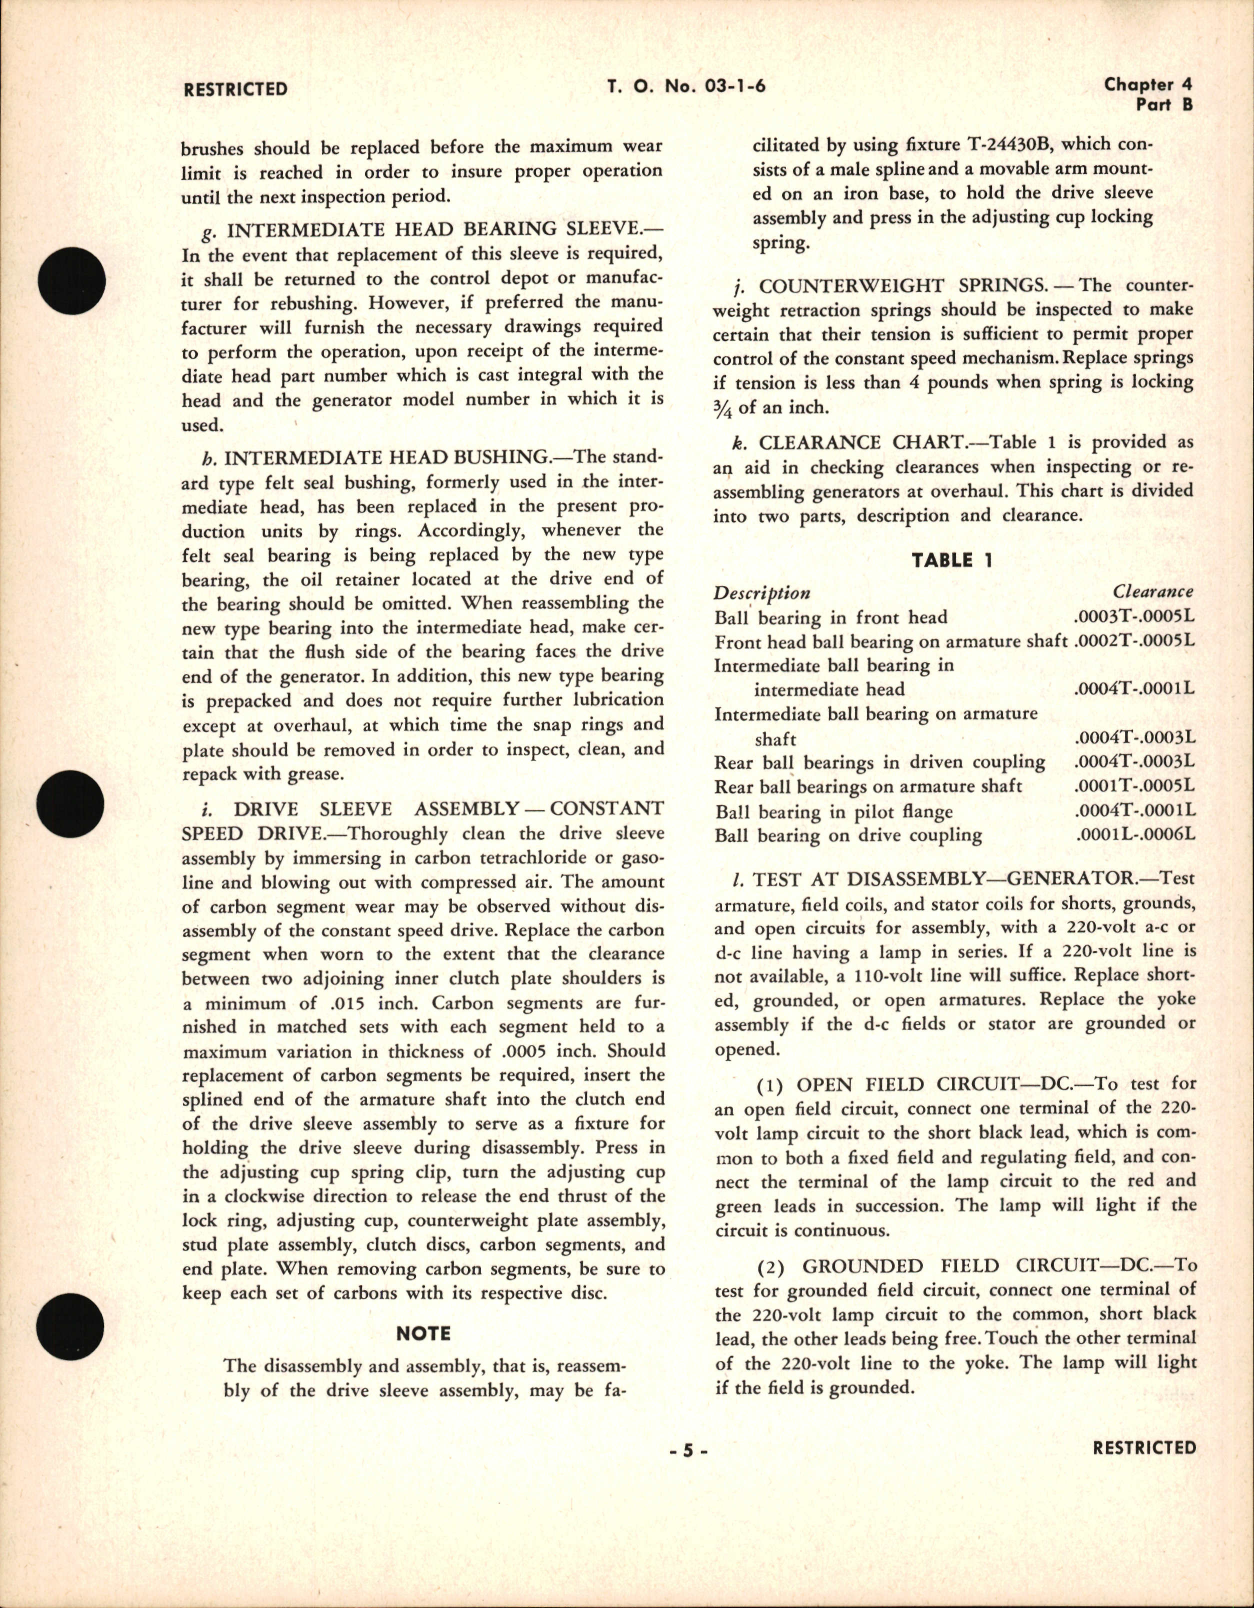 Sample page 5 from AirCorps Library document: Overhaul Instructions for Alternating Current Generators and Control Boxes